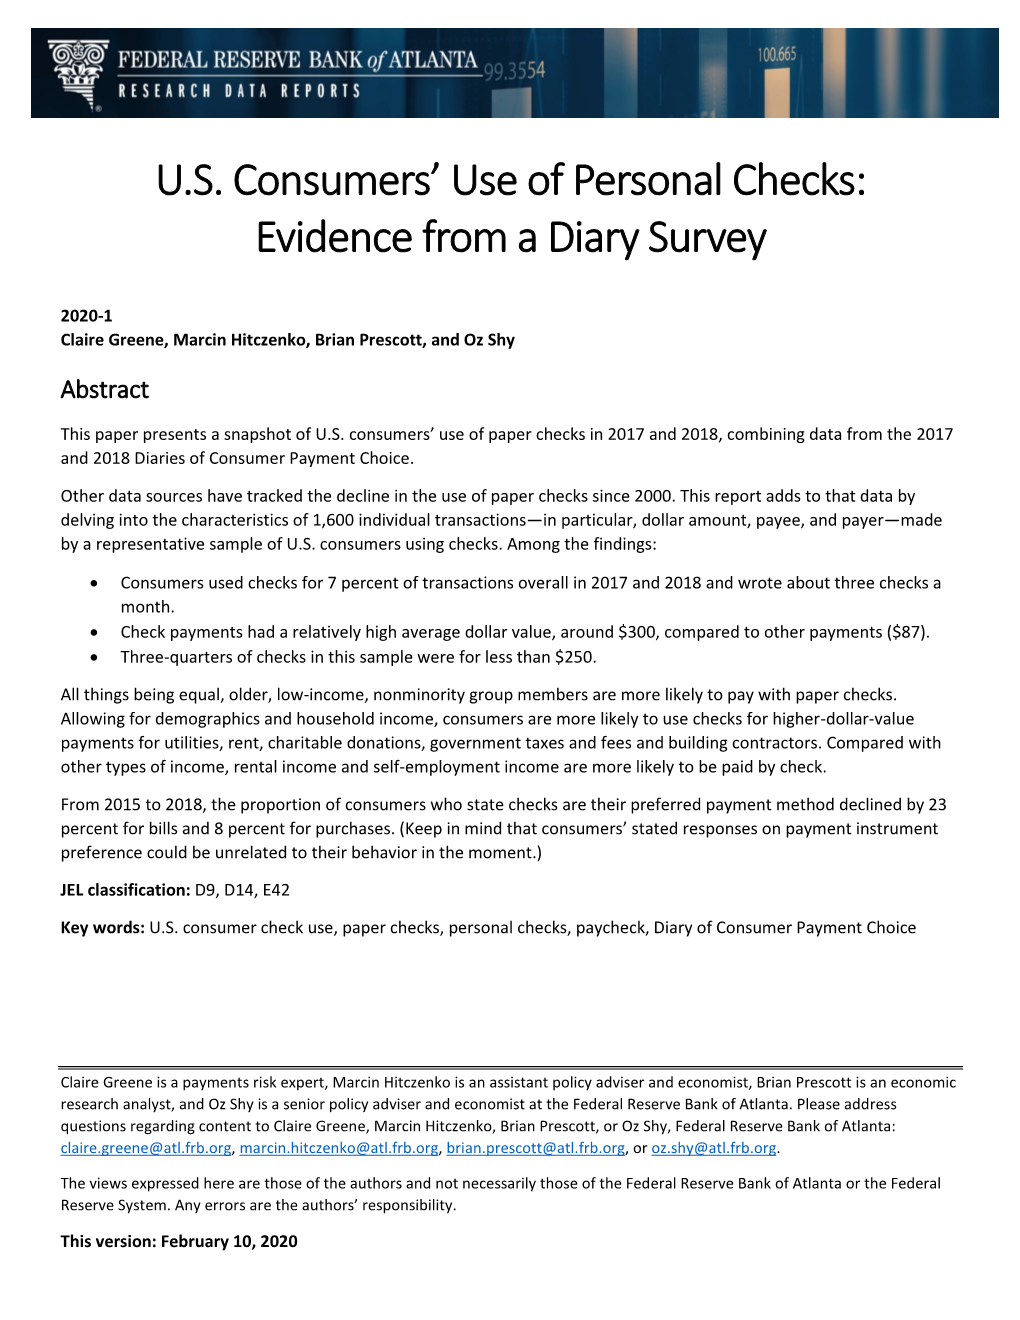 U.S. Consumers' Use of Personal Checks: Evidence from a Diary